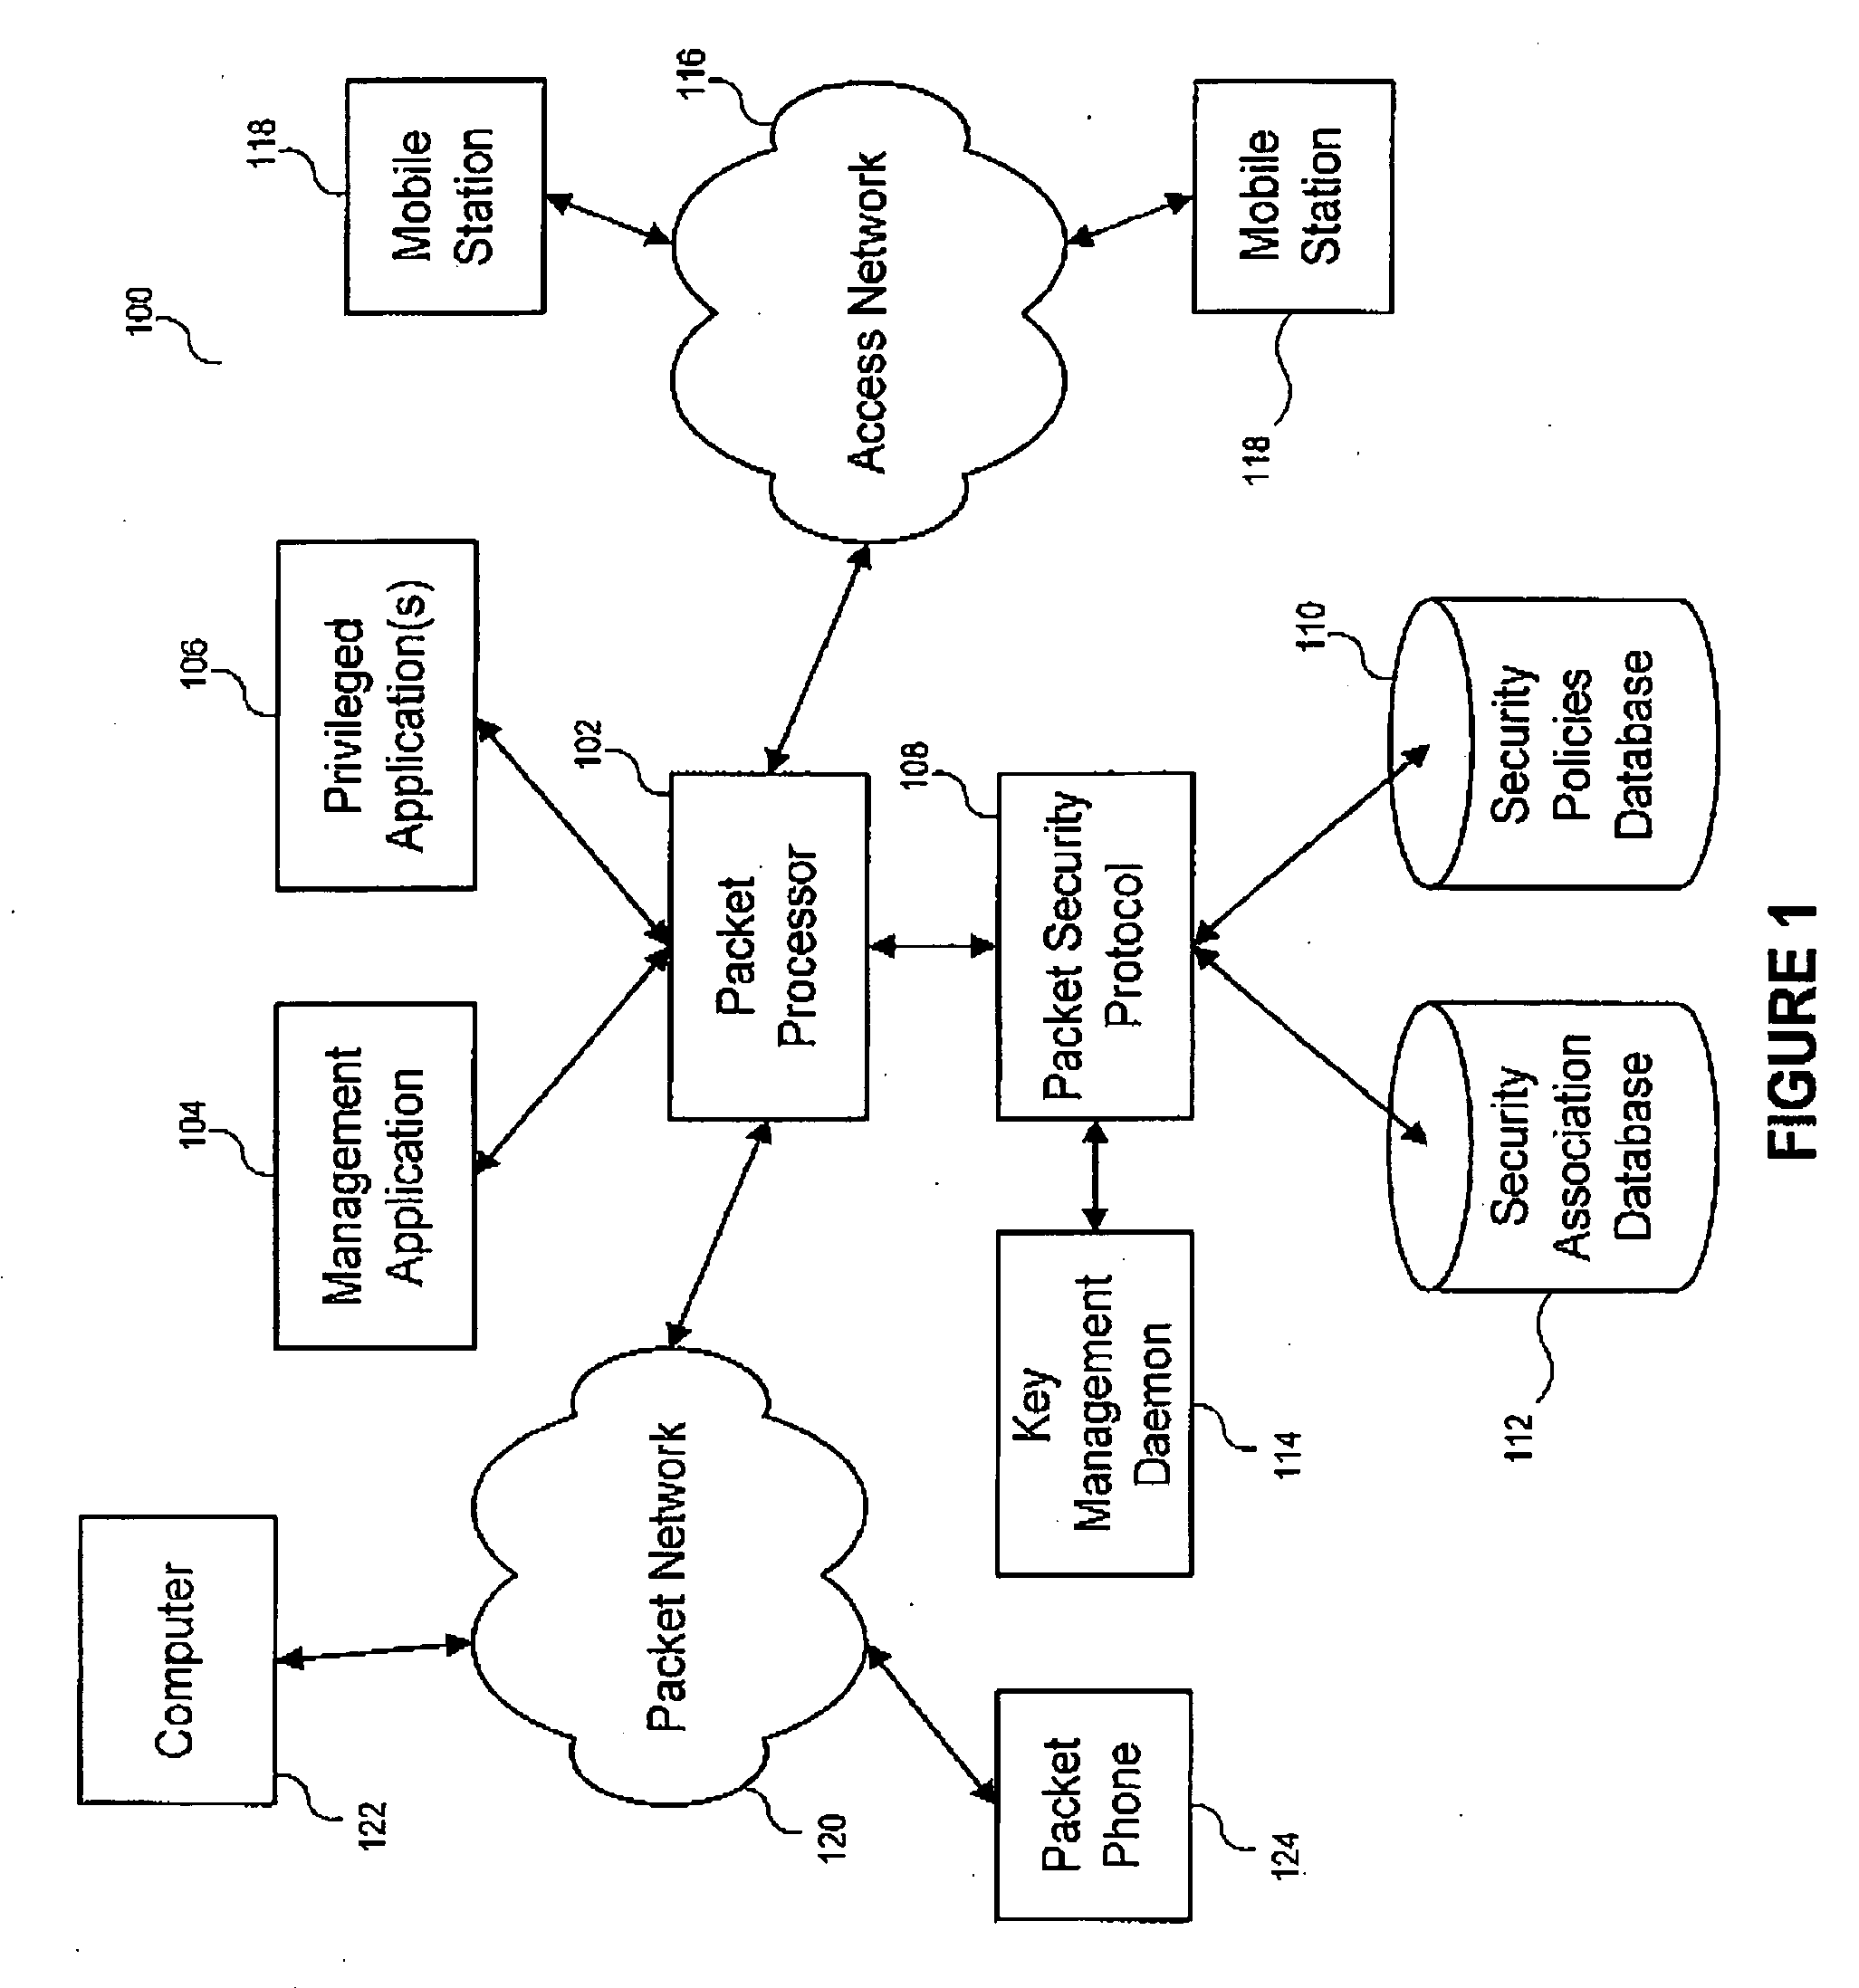 Method, apparatus and system for pre-establishing secure communication channels